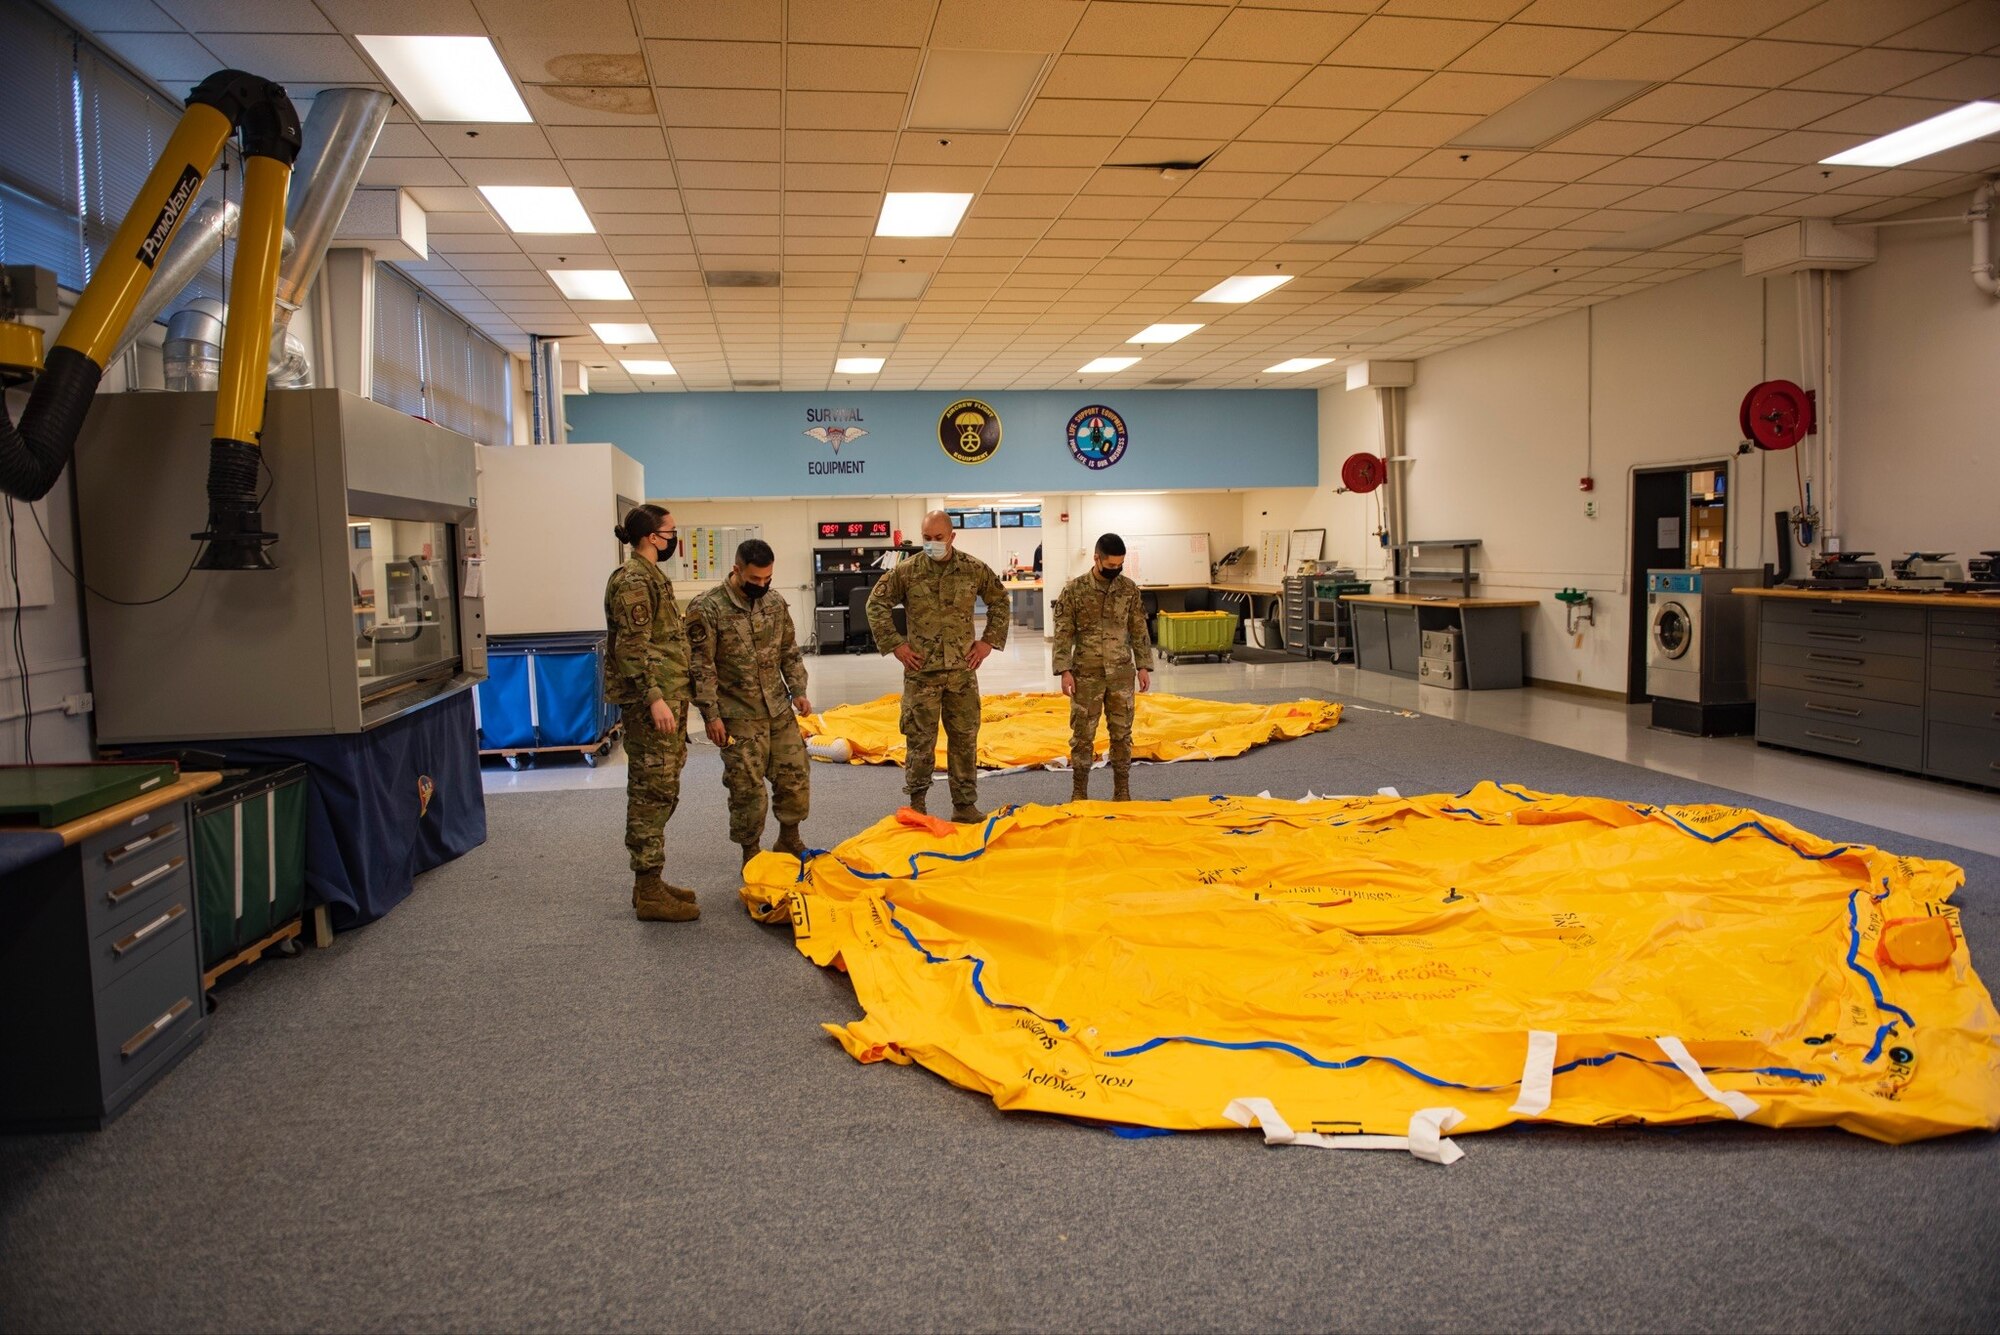 U.S. Air Force Airmen from the 62nd Operations Group aircrew flight equipment section, conduct life raft inspections at Joint Base Lewis-McChord, Wash., Feb. 19, 2022. The AFE members also perform inspections, maintenance, and adjustments of assigned aircrew flight equipment, aircrew chemical defense equipment, night vision goggles, and aircrew laser eye protection. (U.S. Air Force photo by Tech. Sgt. Benjamin Sutton)